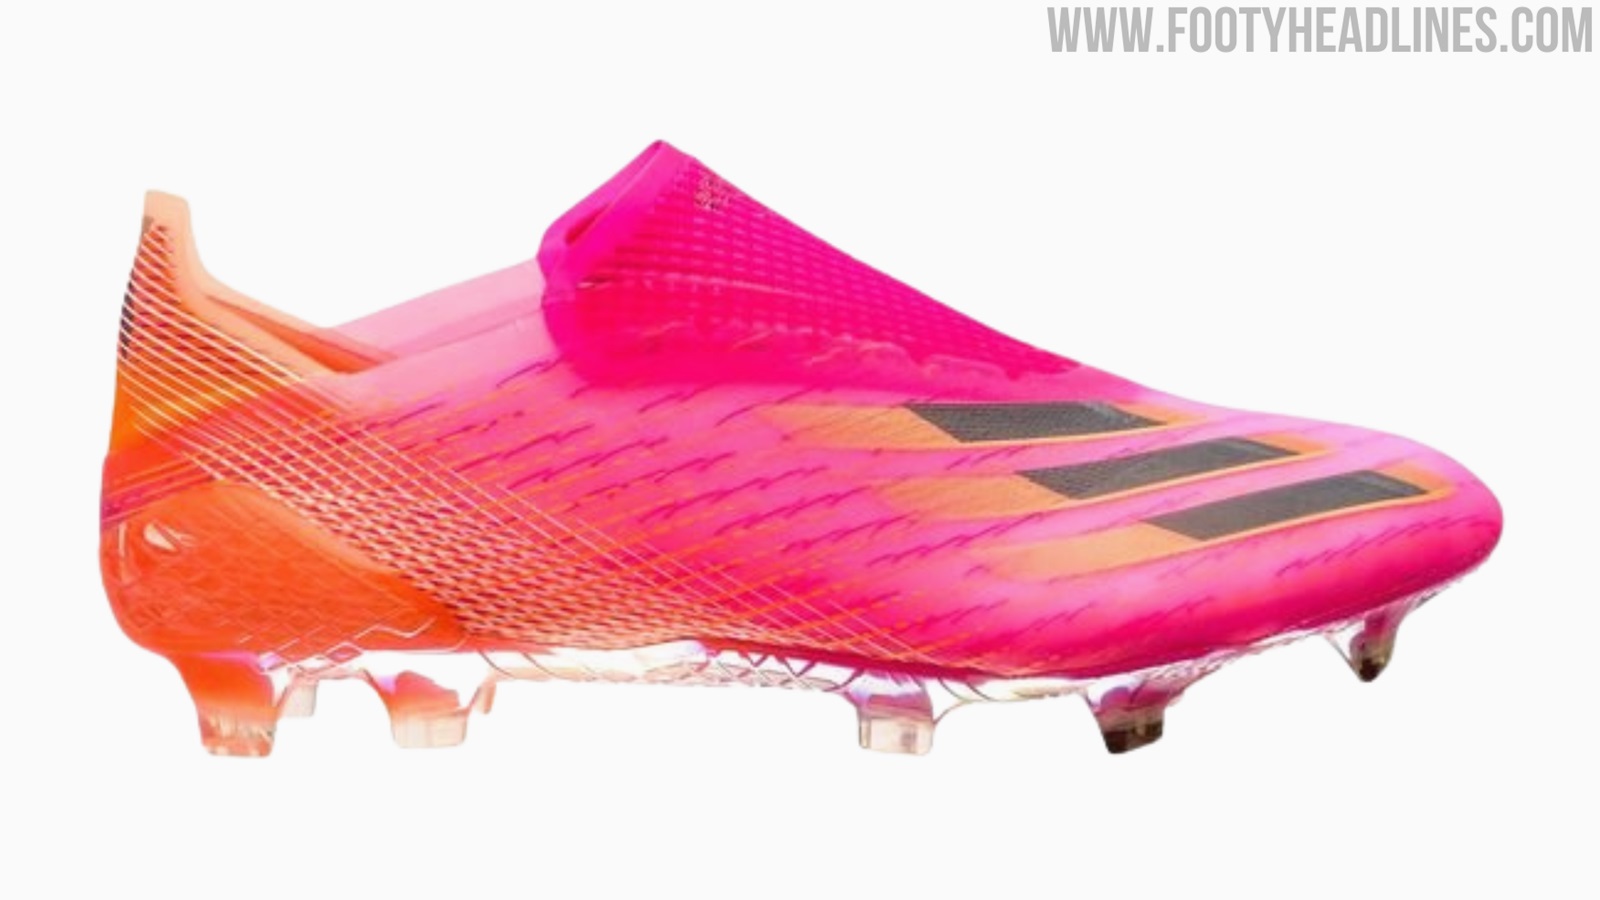 25 Pink Football Boots - It All Started with Nike x Bendtner In